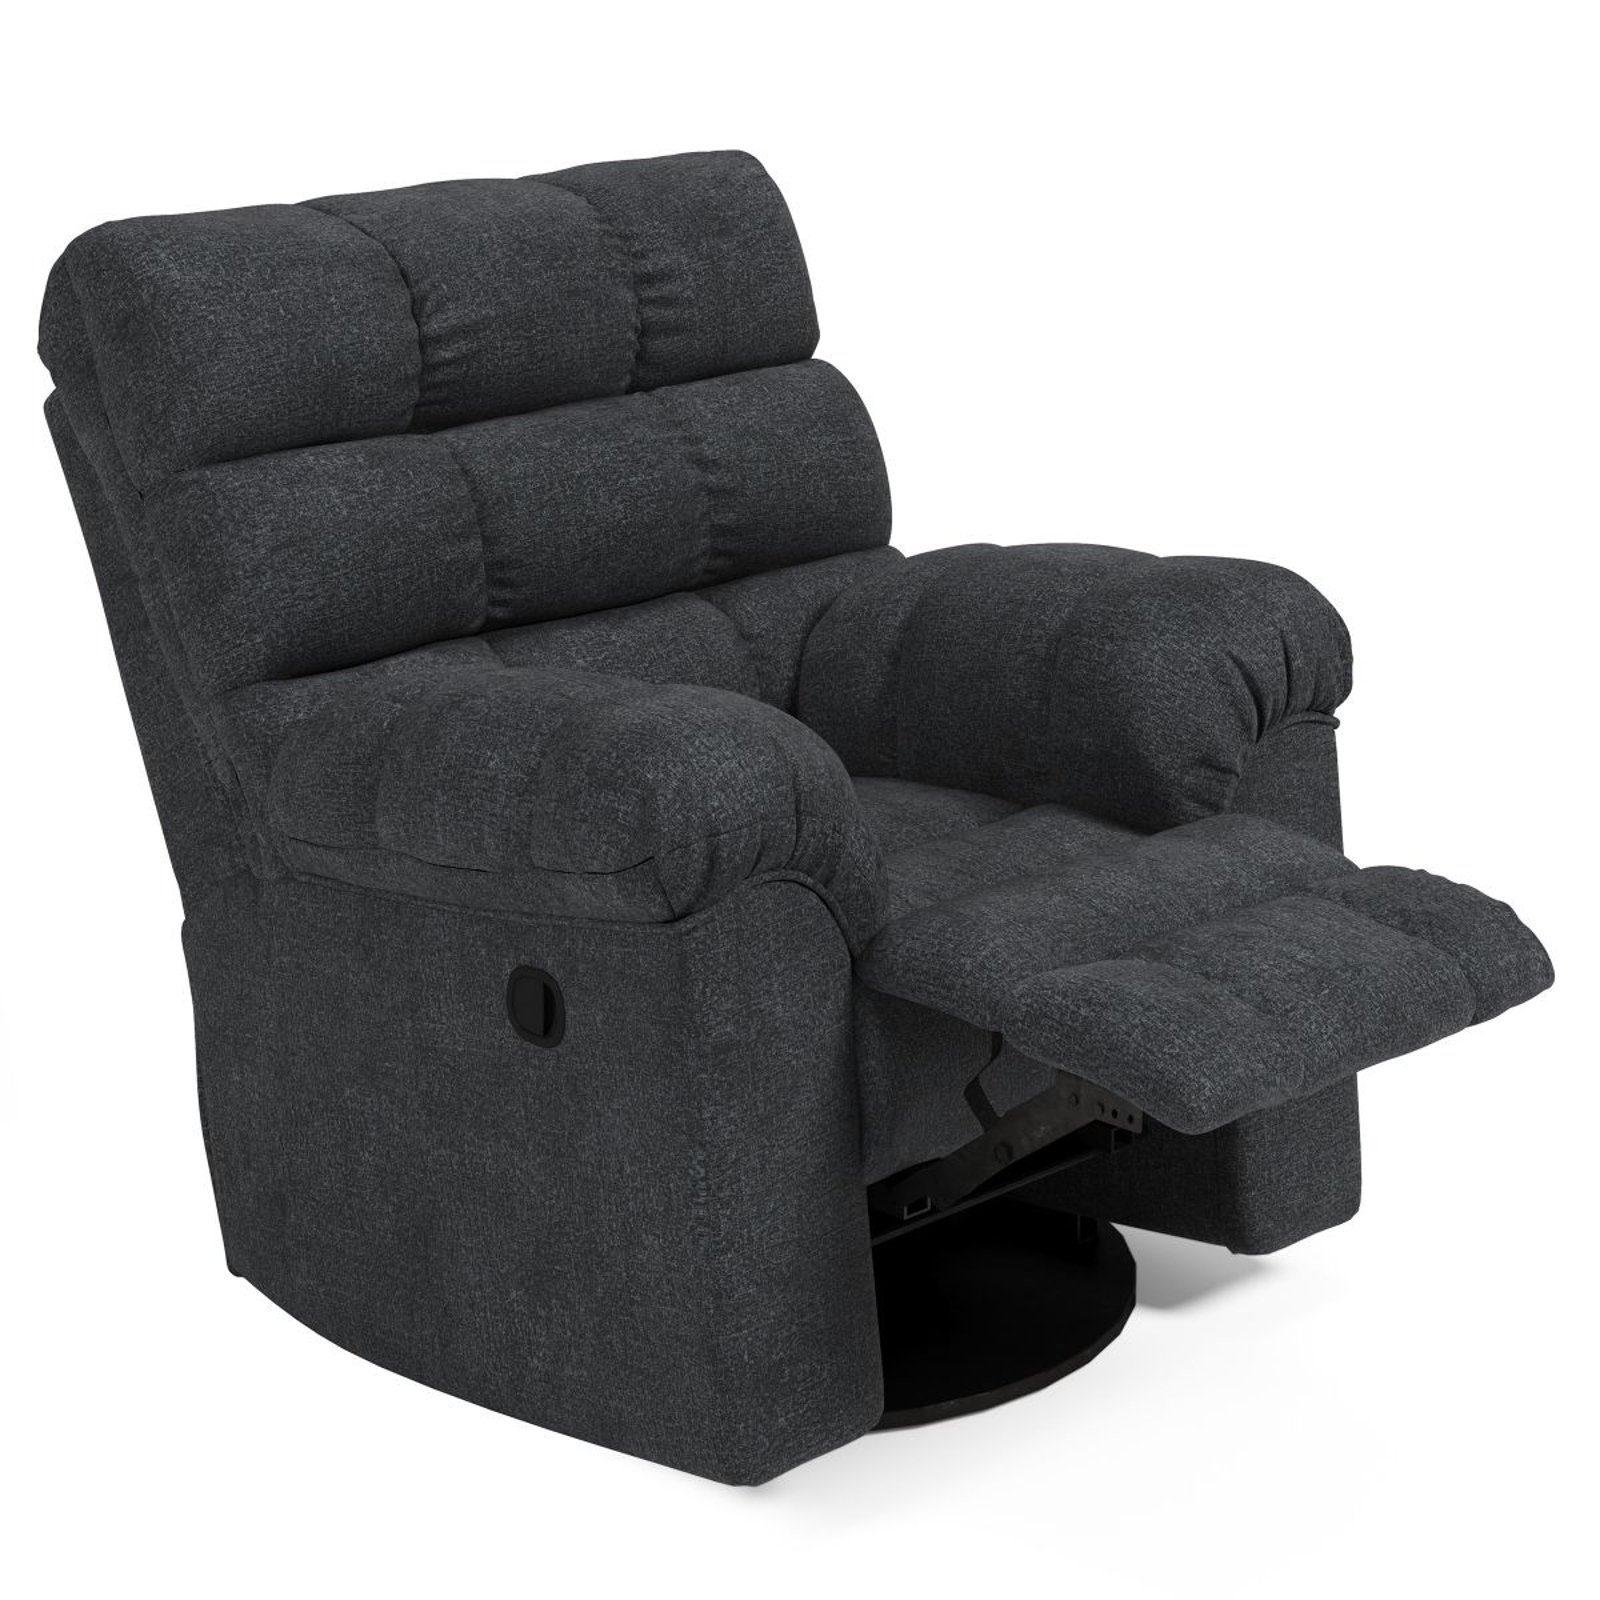 Picture of Wilhurst Recliner